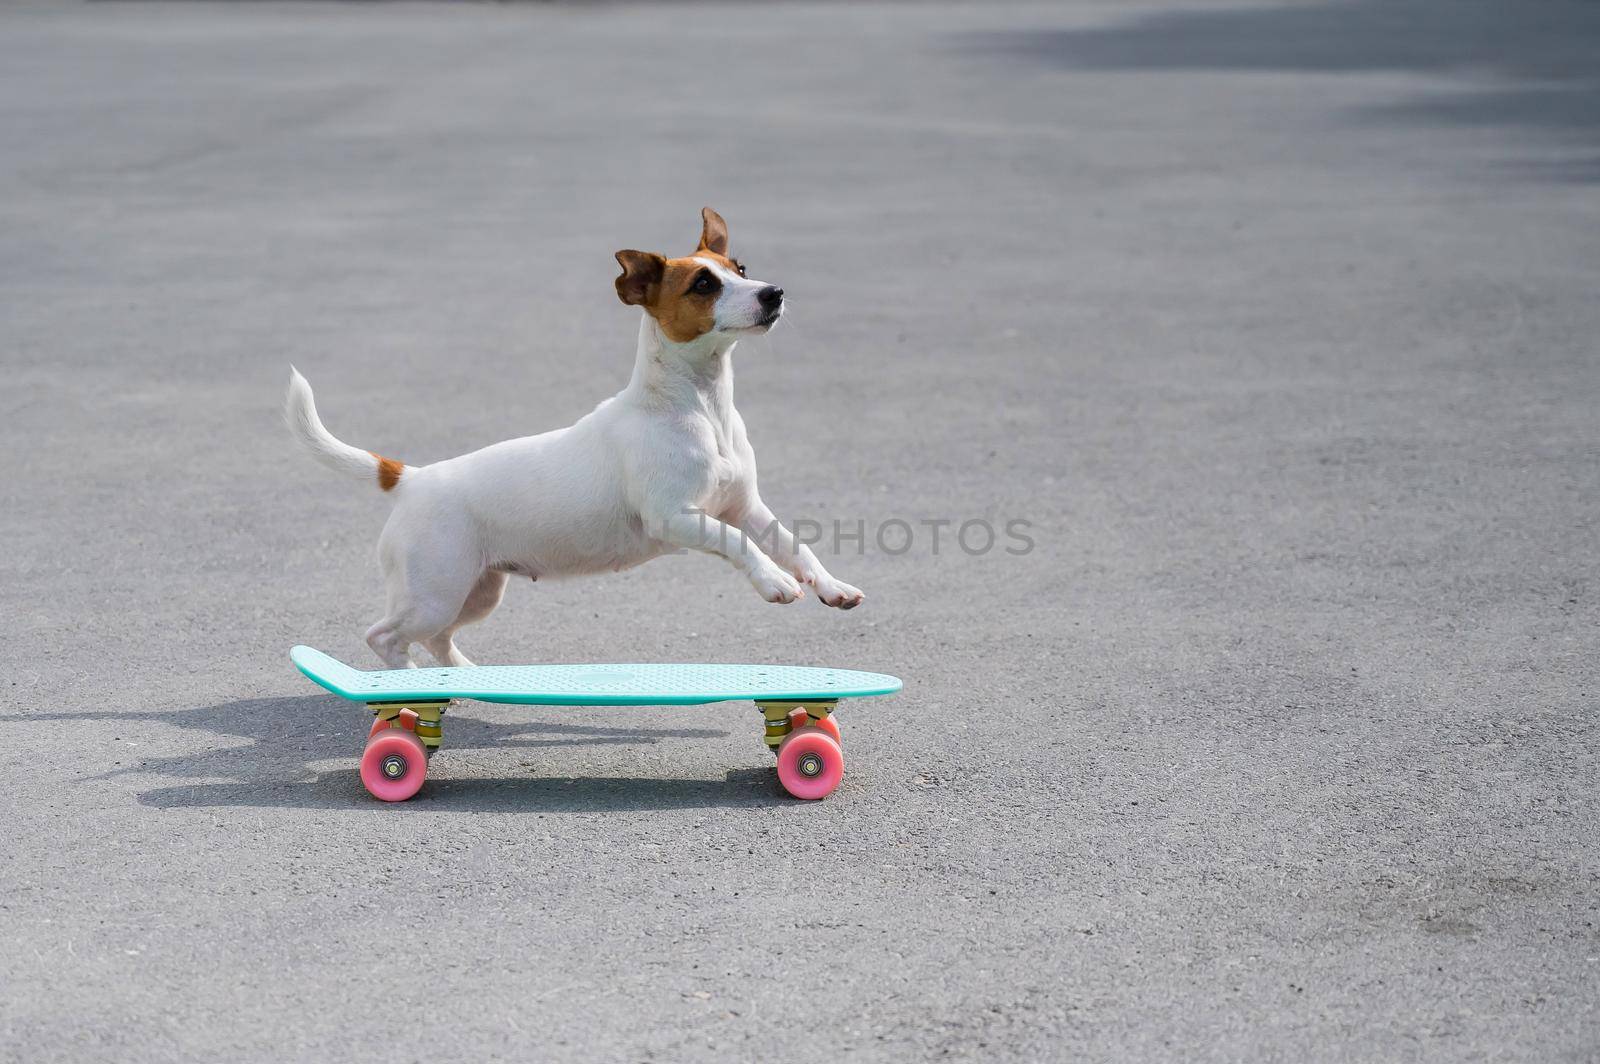 The dog rides a penny board outdoors. Jack russell terrier performing tricks on a skateboard by mrwed54